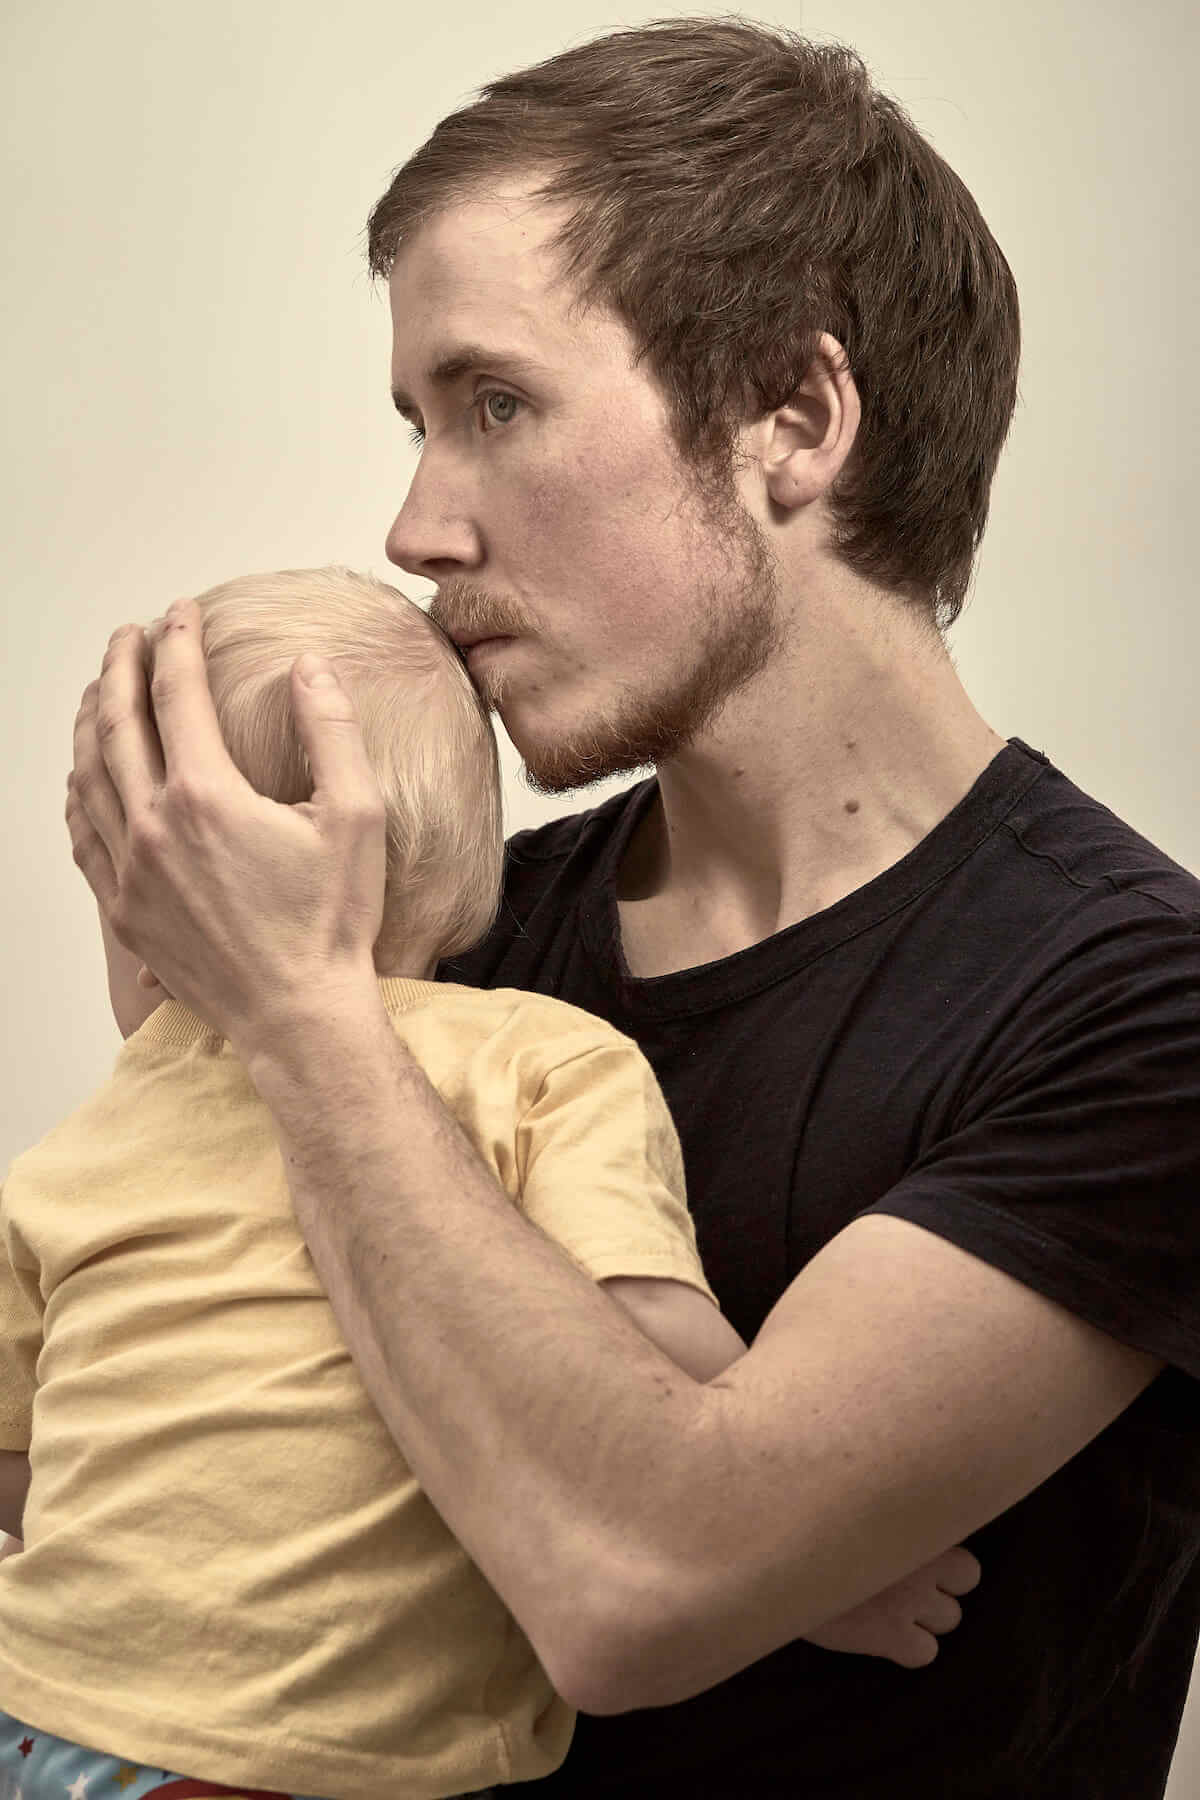 Still from Seahorse: The Dad Who Gave Birth. Freddy is standing in profile to the camera. He has short brown hair and facial hair and is cradling the son he carried and gave birth to. The child has their face turned away and you see the blonde back of their head.